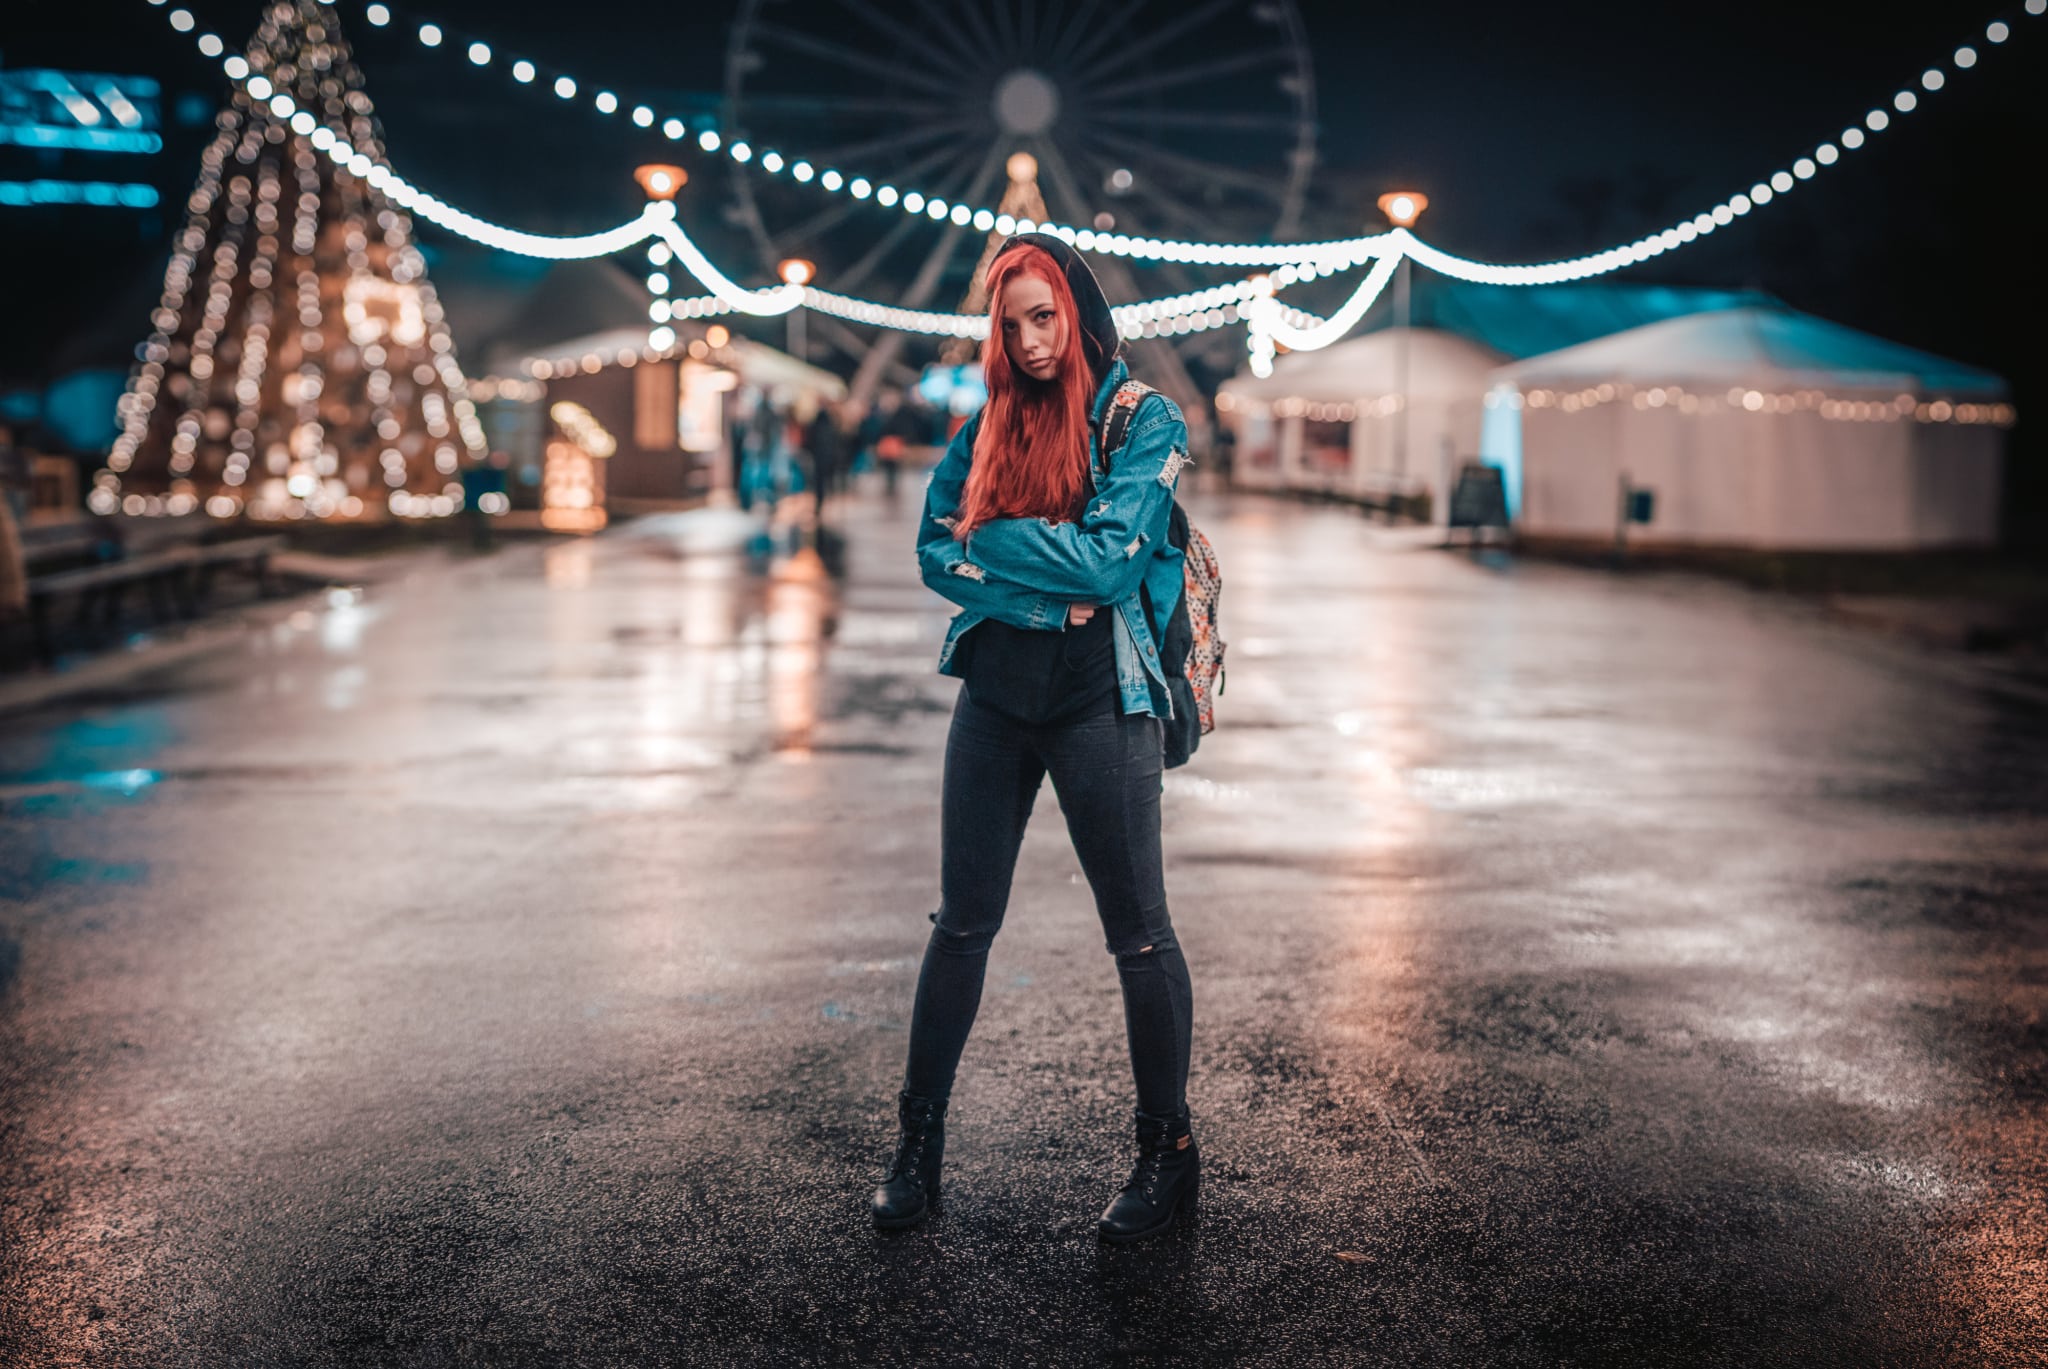 How Can You Get Stronger Bokeh? - girl with wheel in background